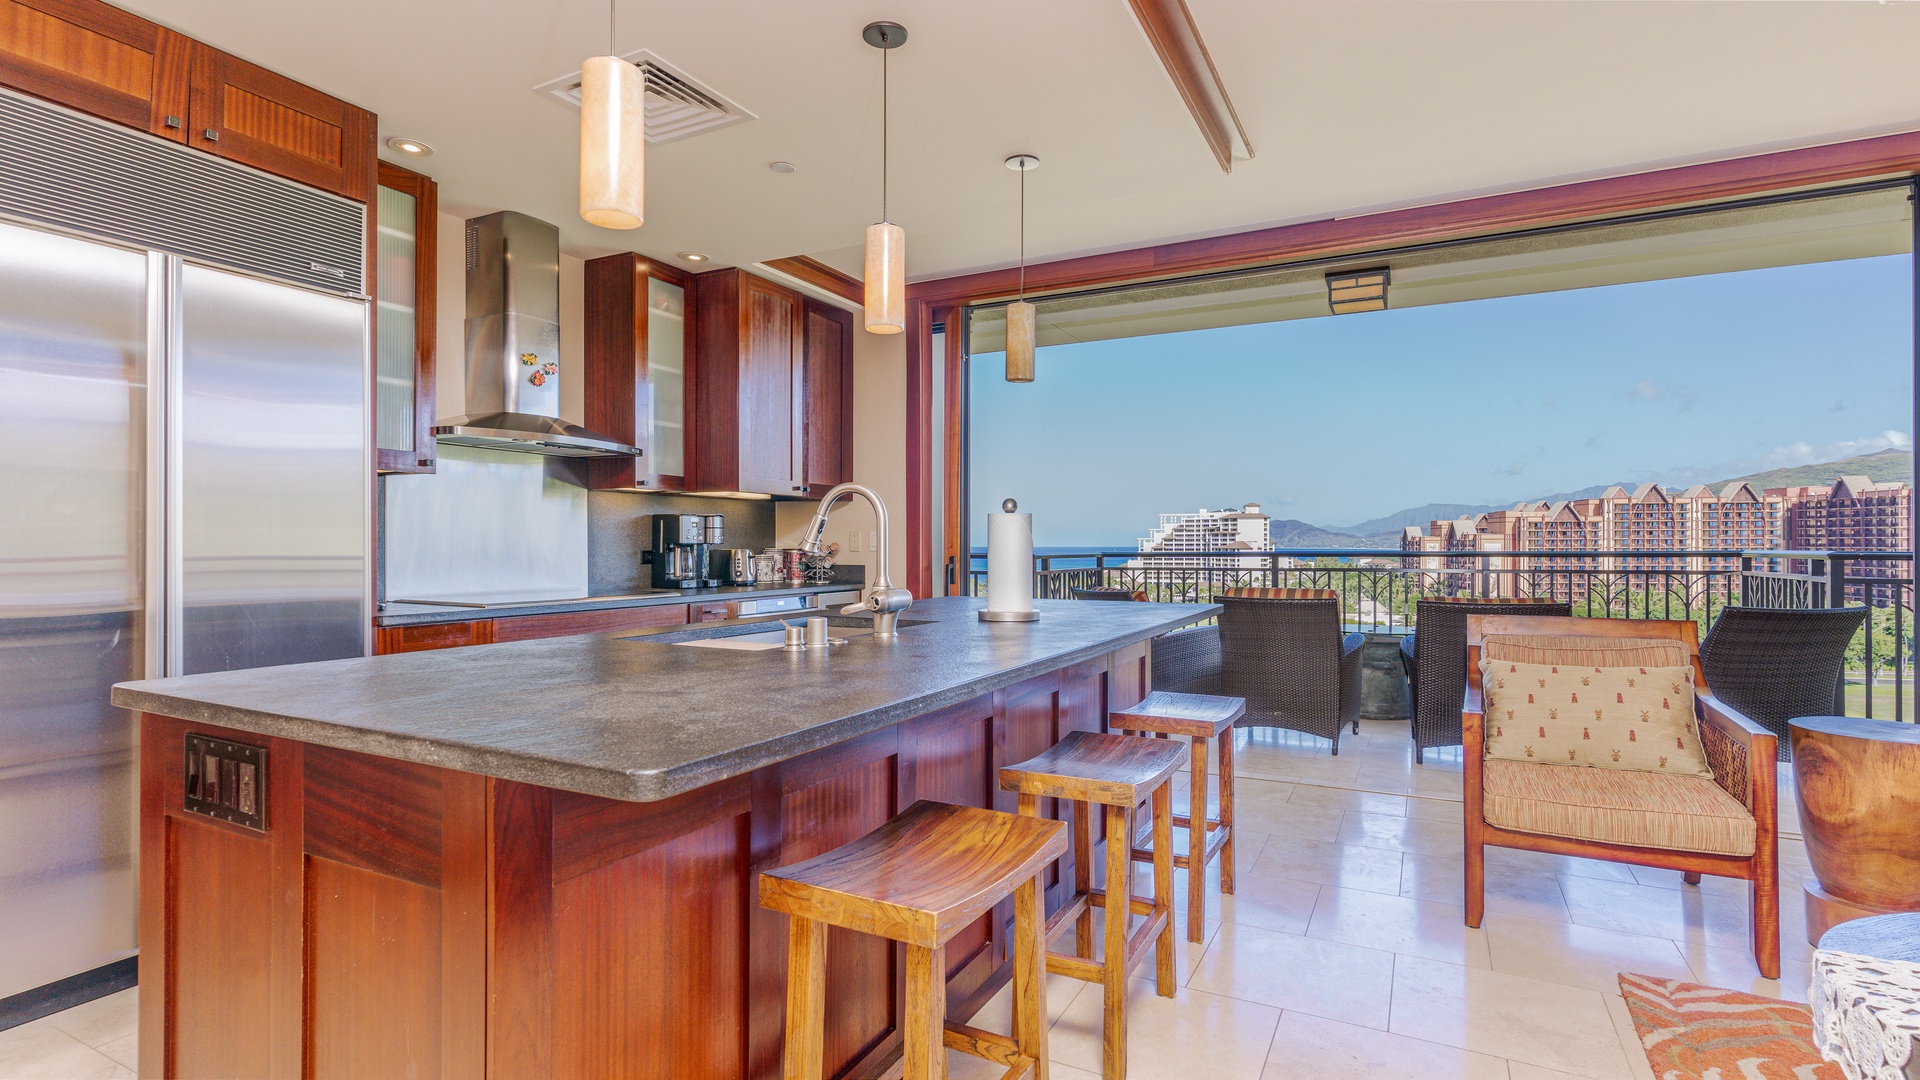 Kapolei Vacation Rentals, Ko Olina Beach Villas B1101 - The kitchen features bar seating, pendant lights and a front row view of sunrises and sunsets.